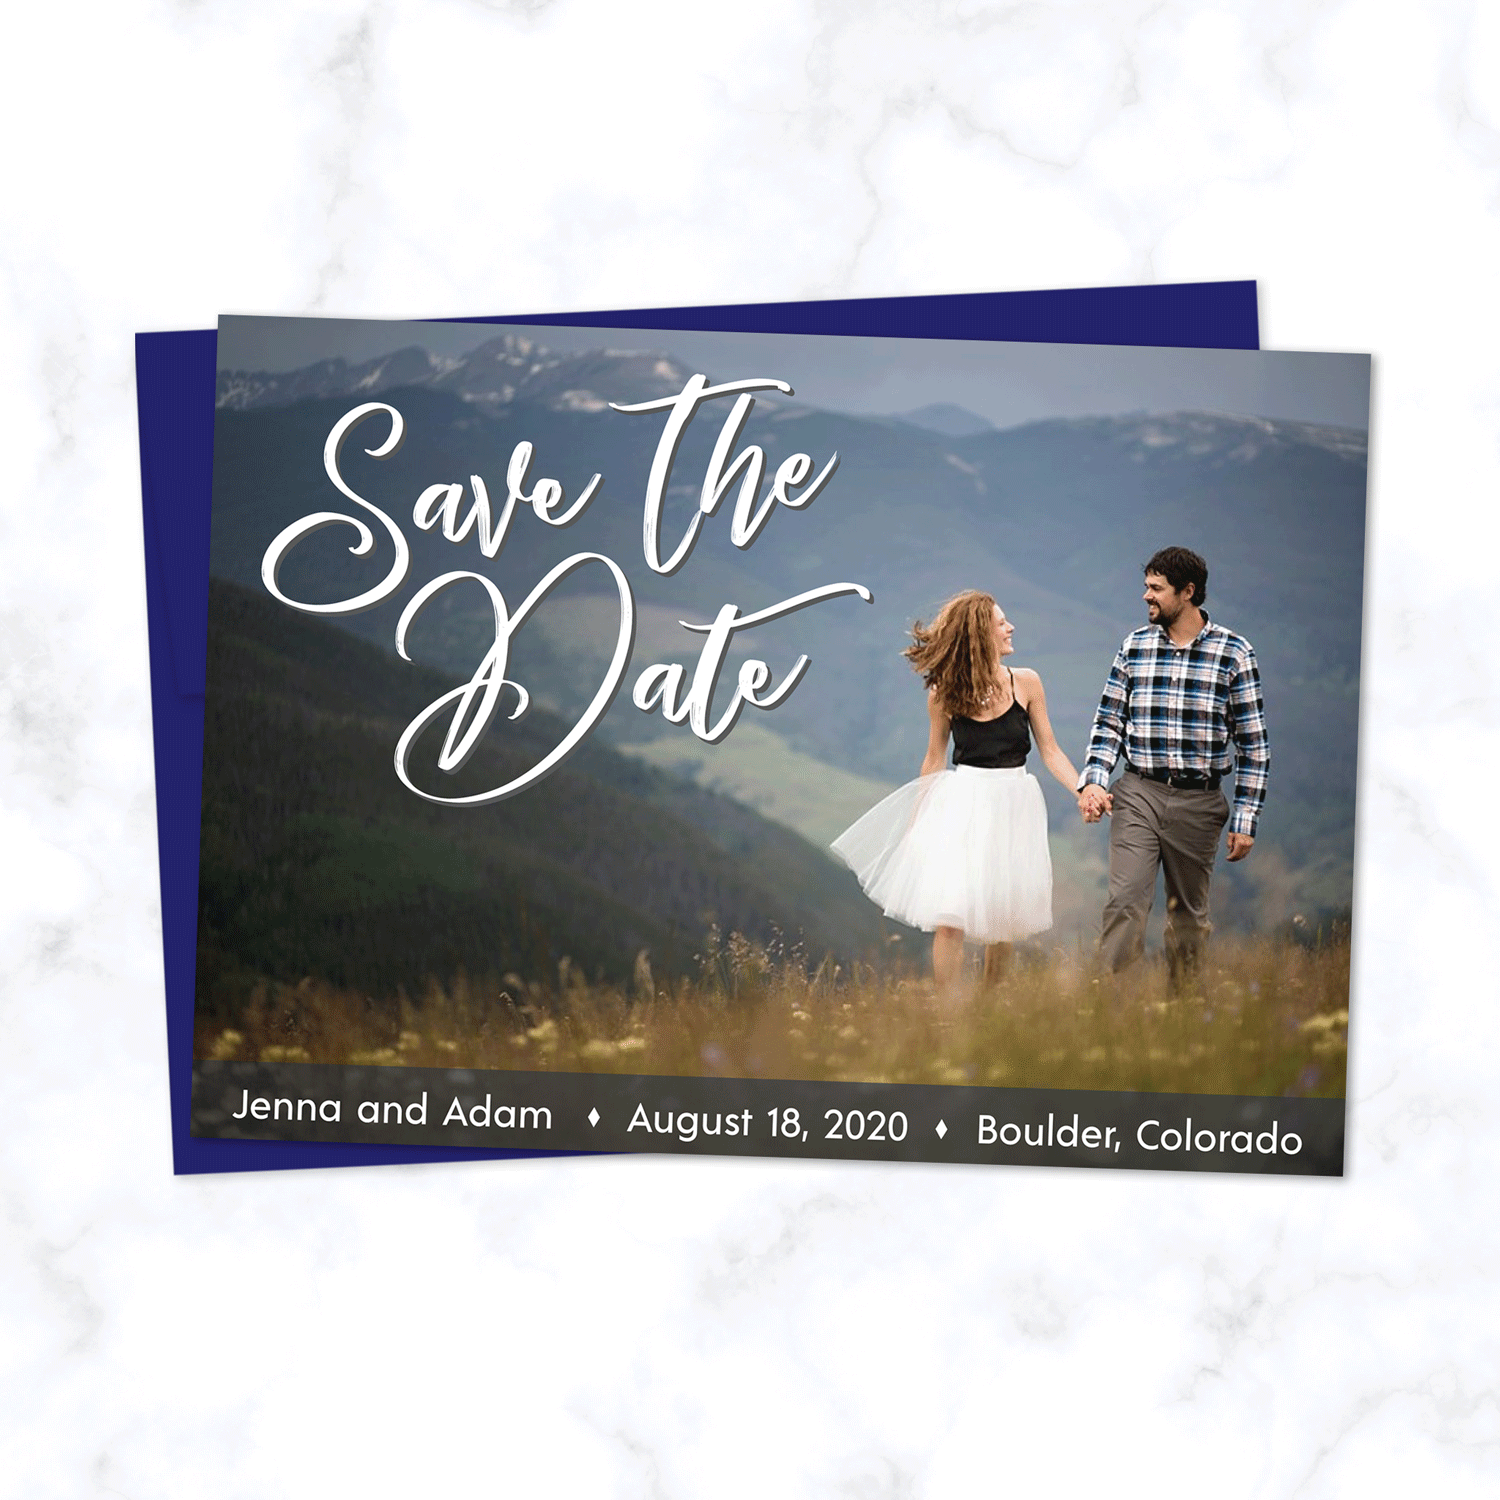 Full Photo Wedding Save the Date Card with Sapphire / Navy Blue Envelopes - Landscape Orientation with Full Color Photograph